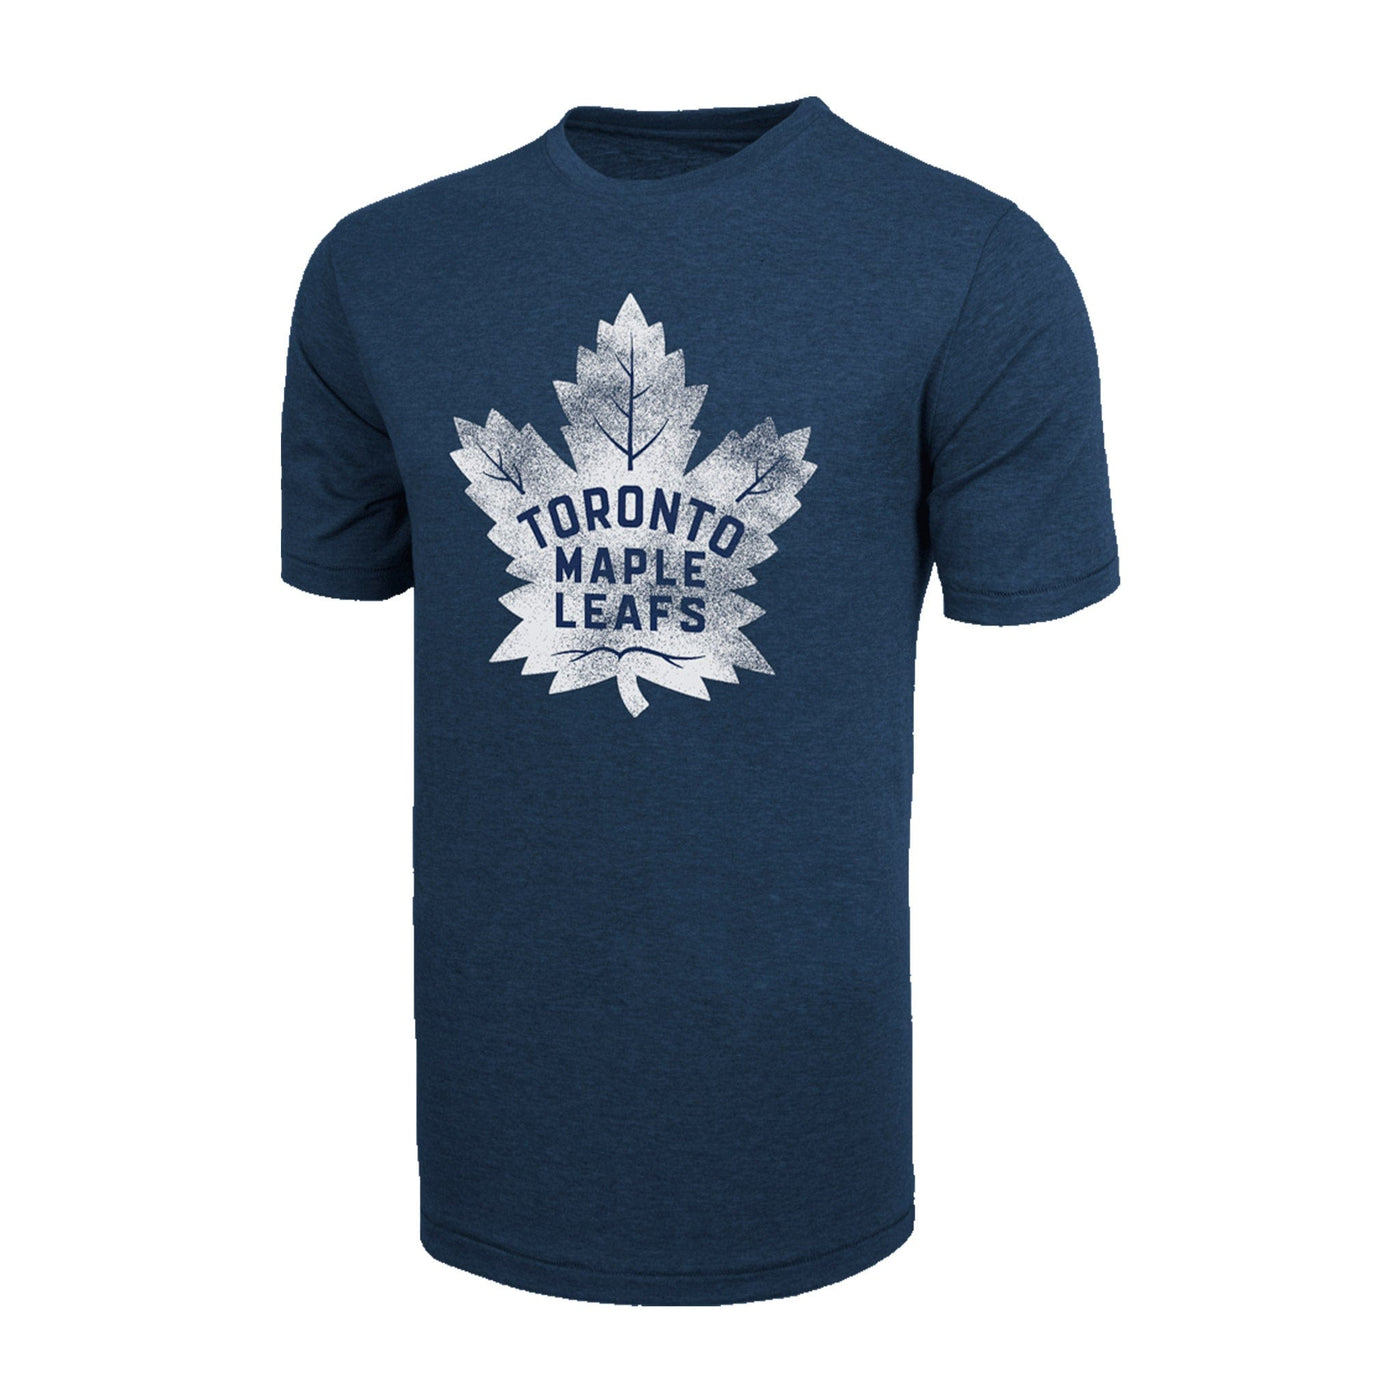 Toronto Maple Leafs 47 Brand NHL Distressed Imprint Shortsleeve Shirt - The Hockey Shop Source For Sports